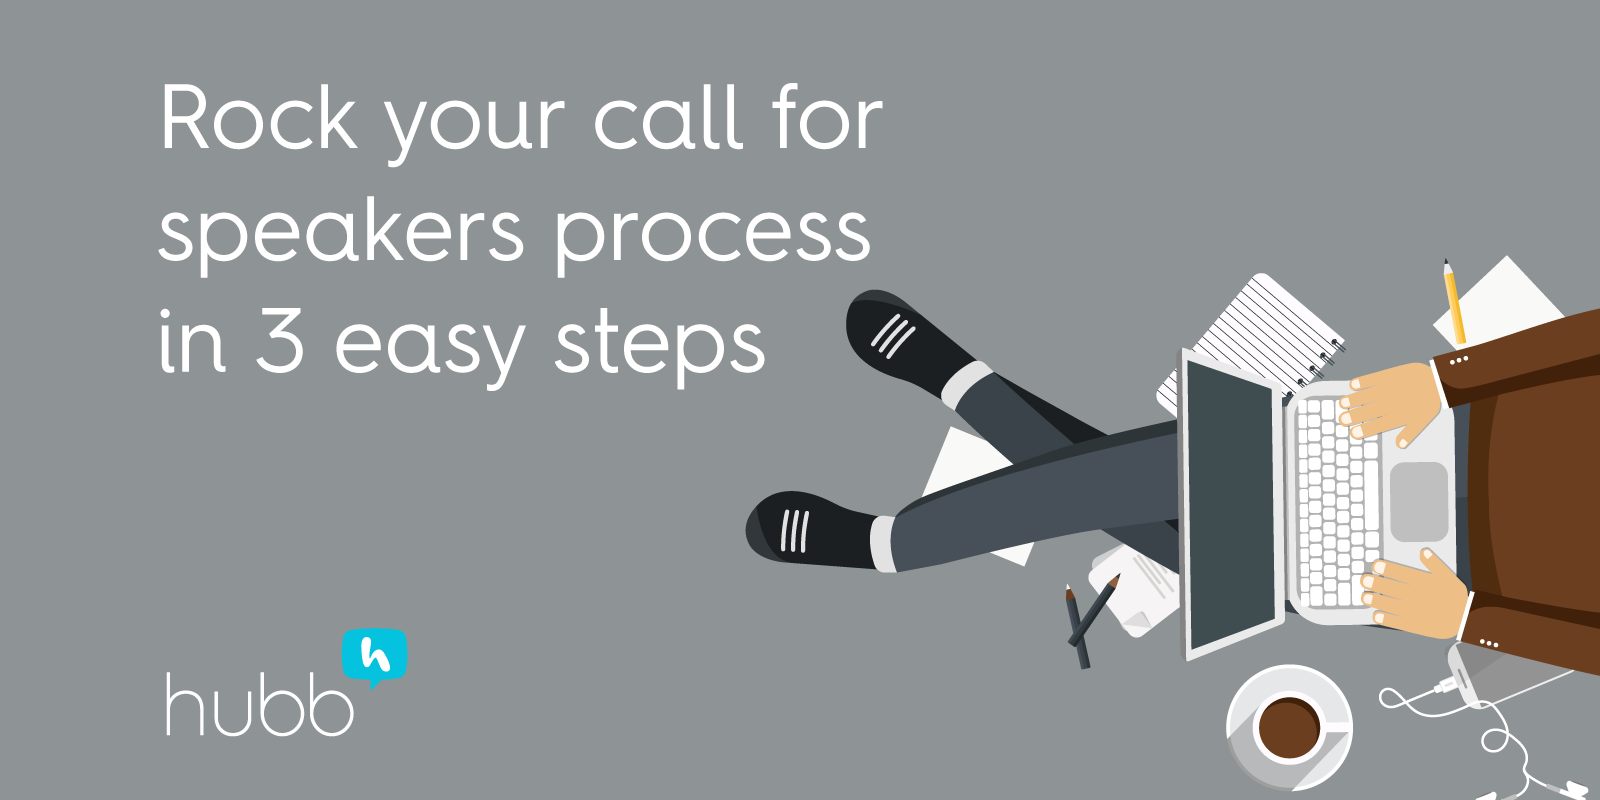 Rock your call for speakers process in 3 easy steps